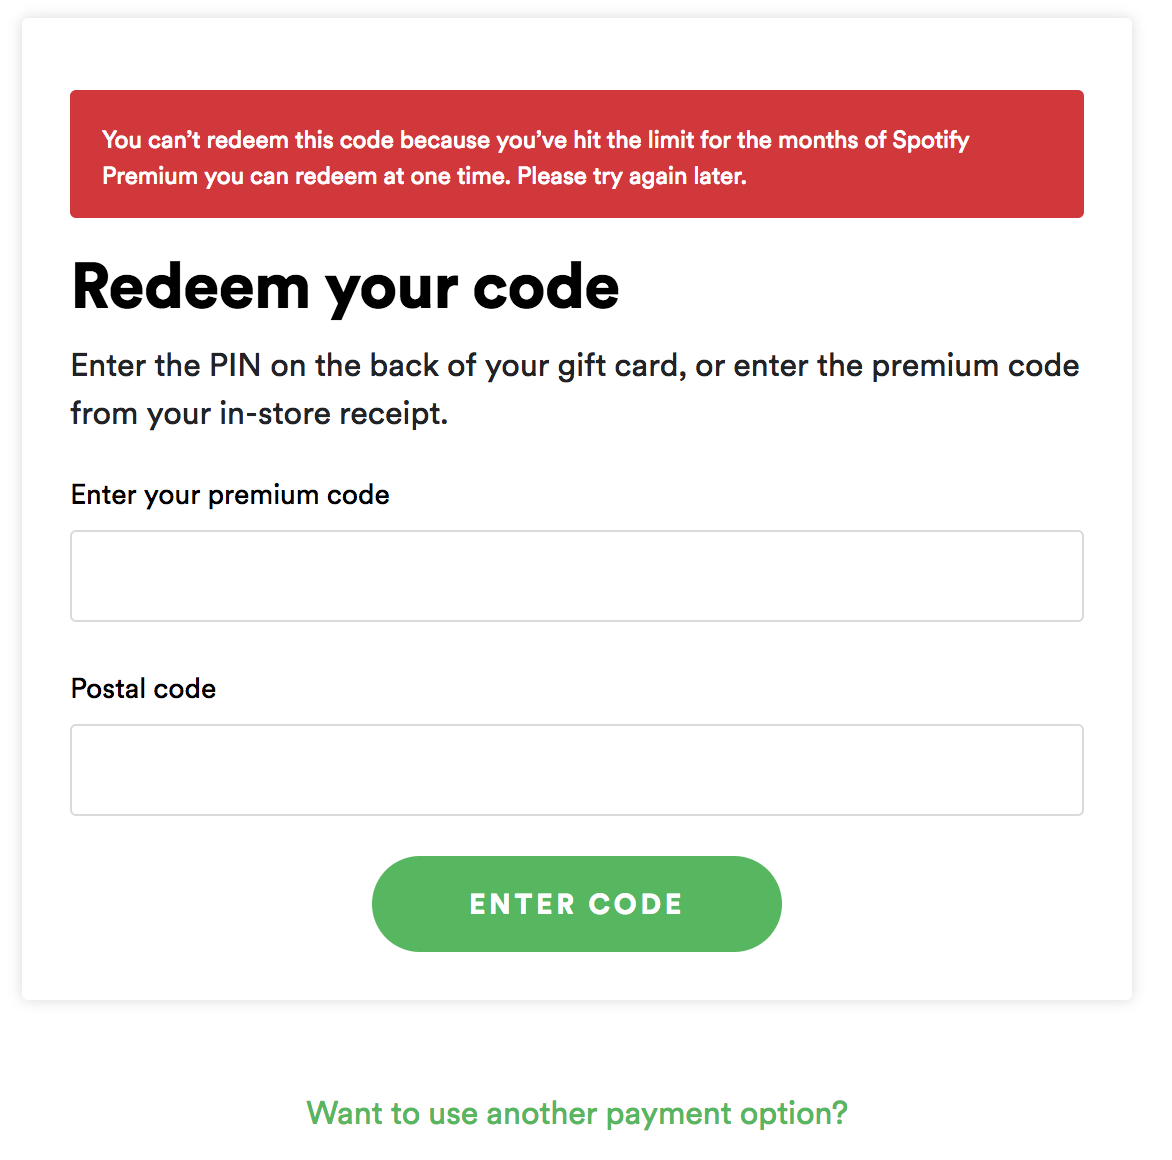 Redeemed one gift card, now I cannot redeem anothe... - The Spotify  Community